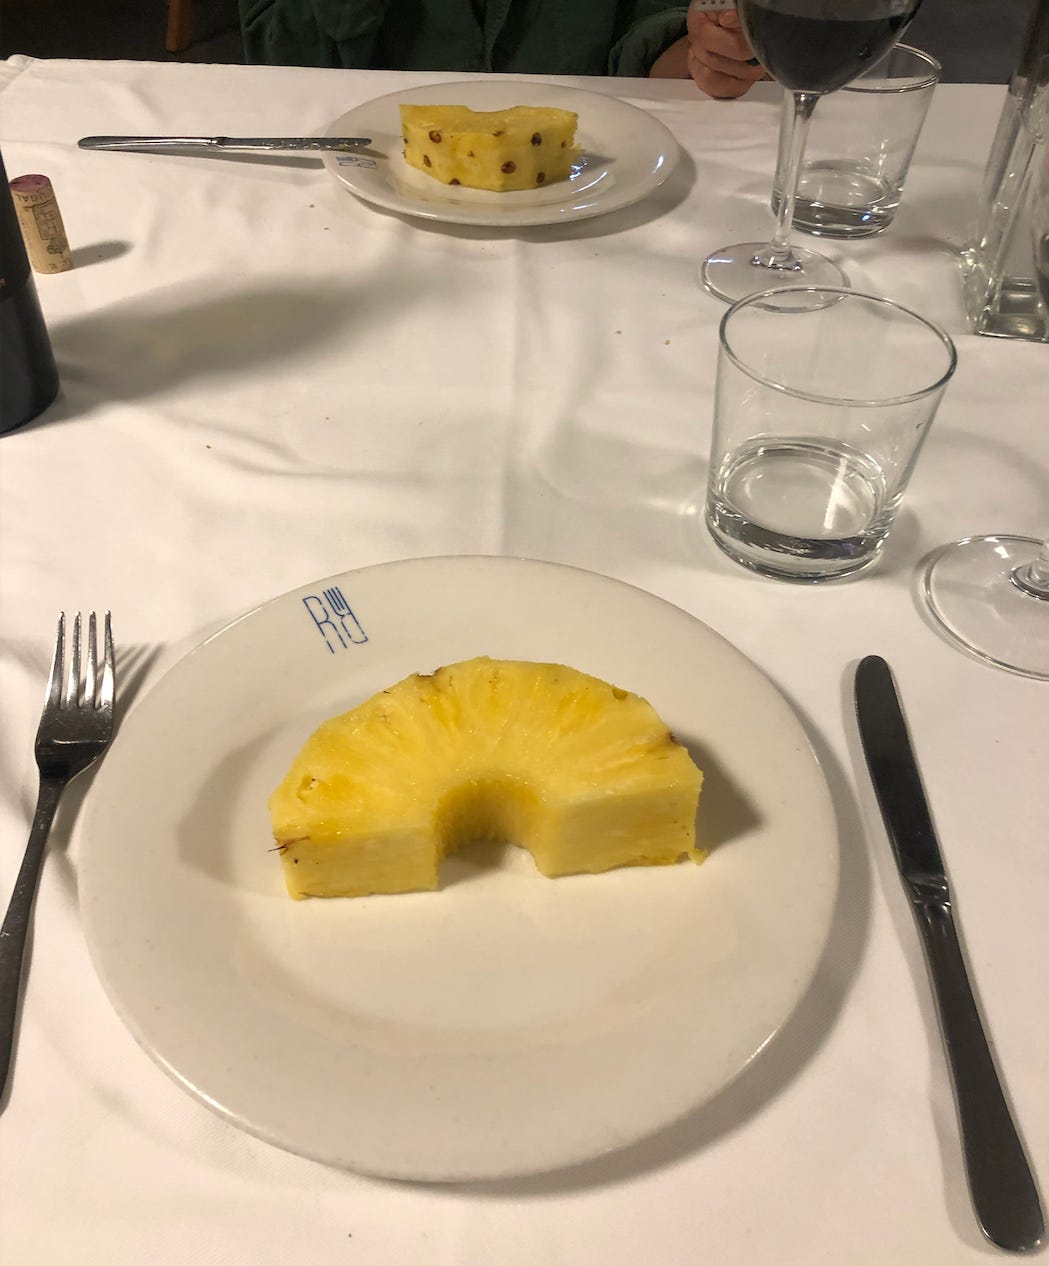 Our humble slice of pineapple, cut in two to share.